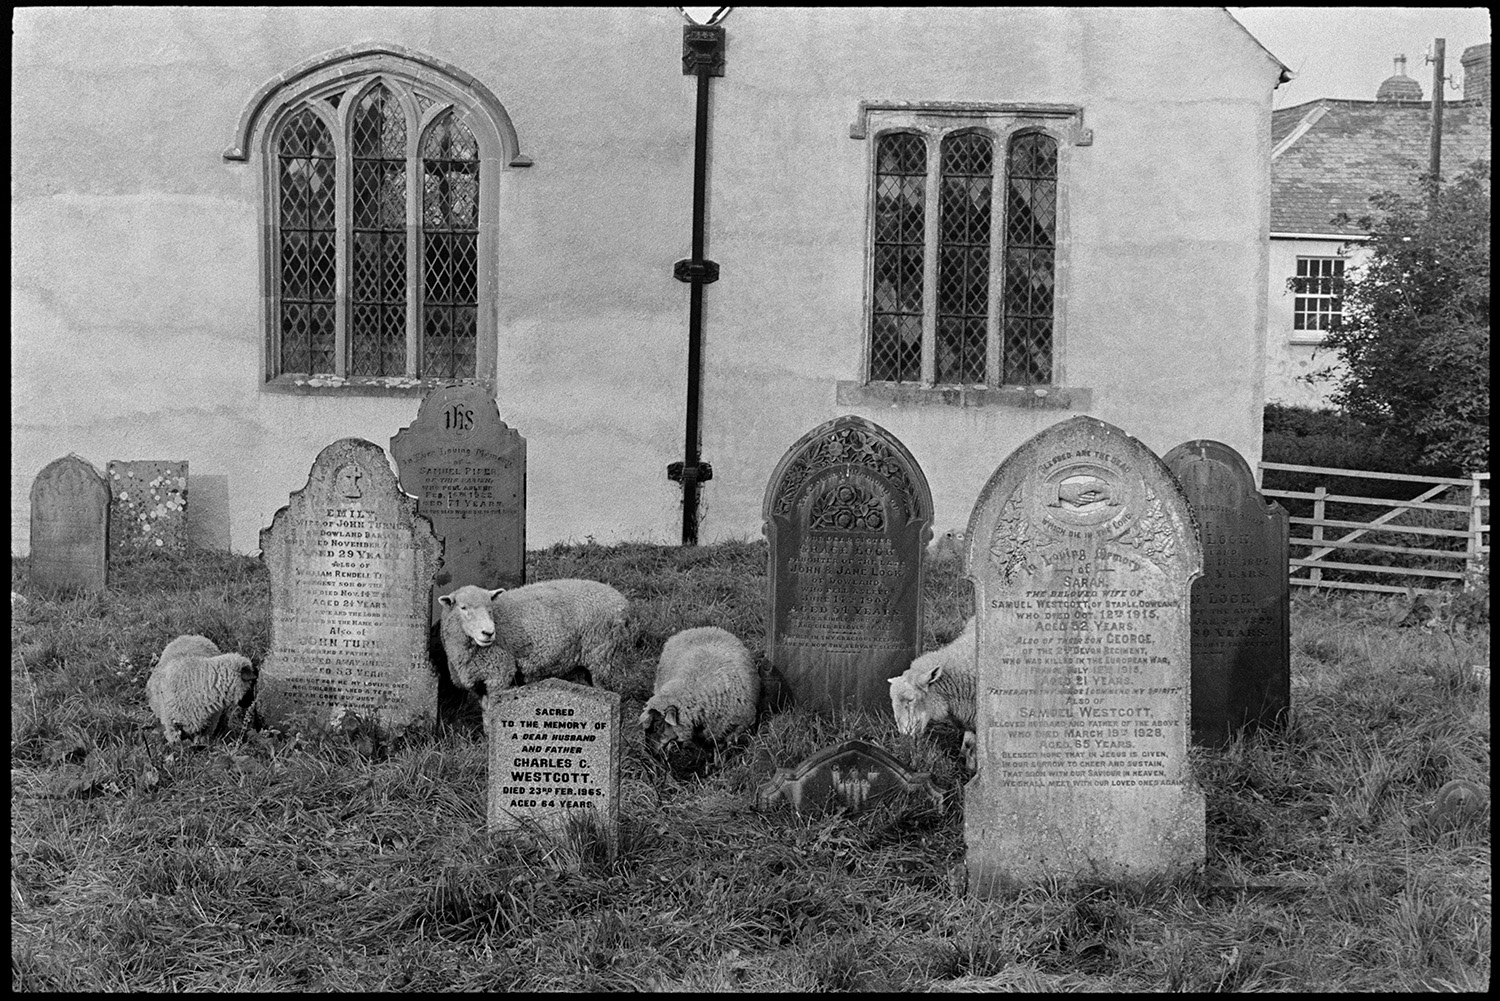 Sheep grazing in graveyard.
[Four sheep grazing amongst gravestones at Dowland churchyard, Dolton. The church can be seen in the background.]